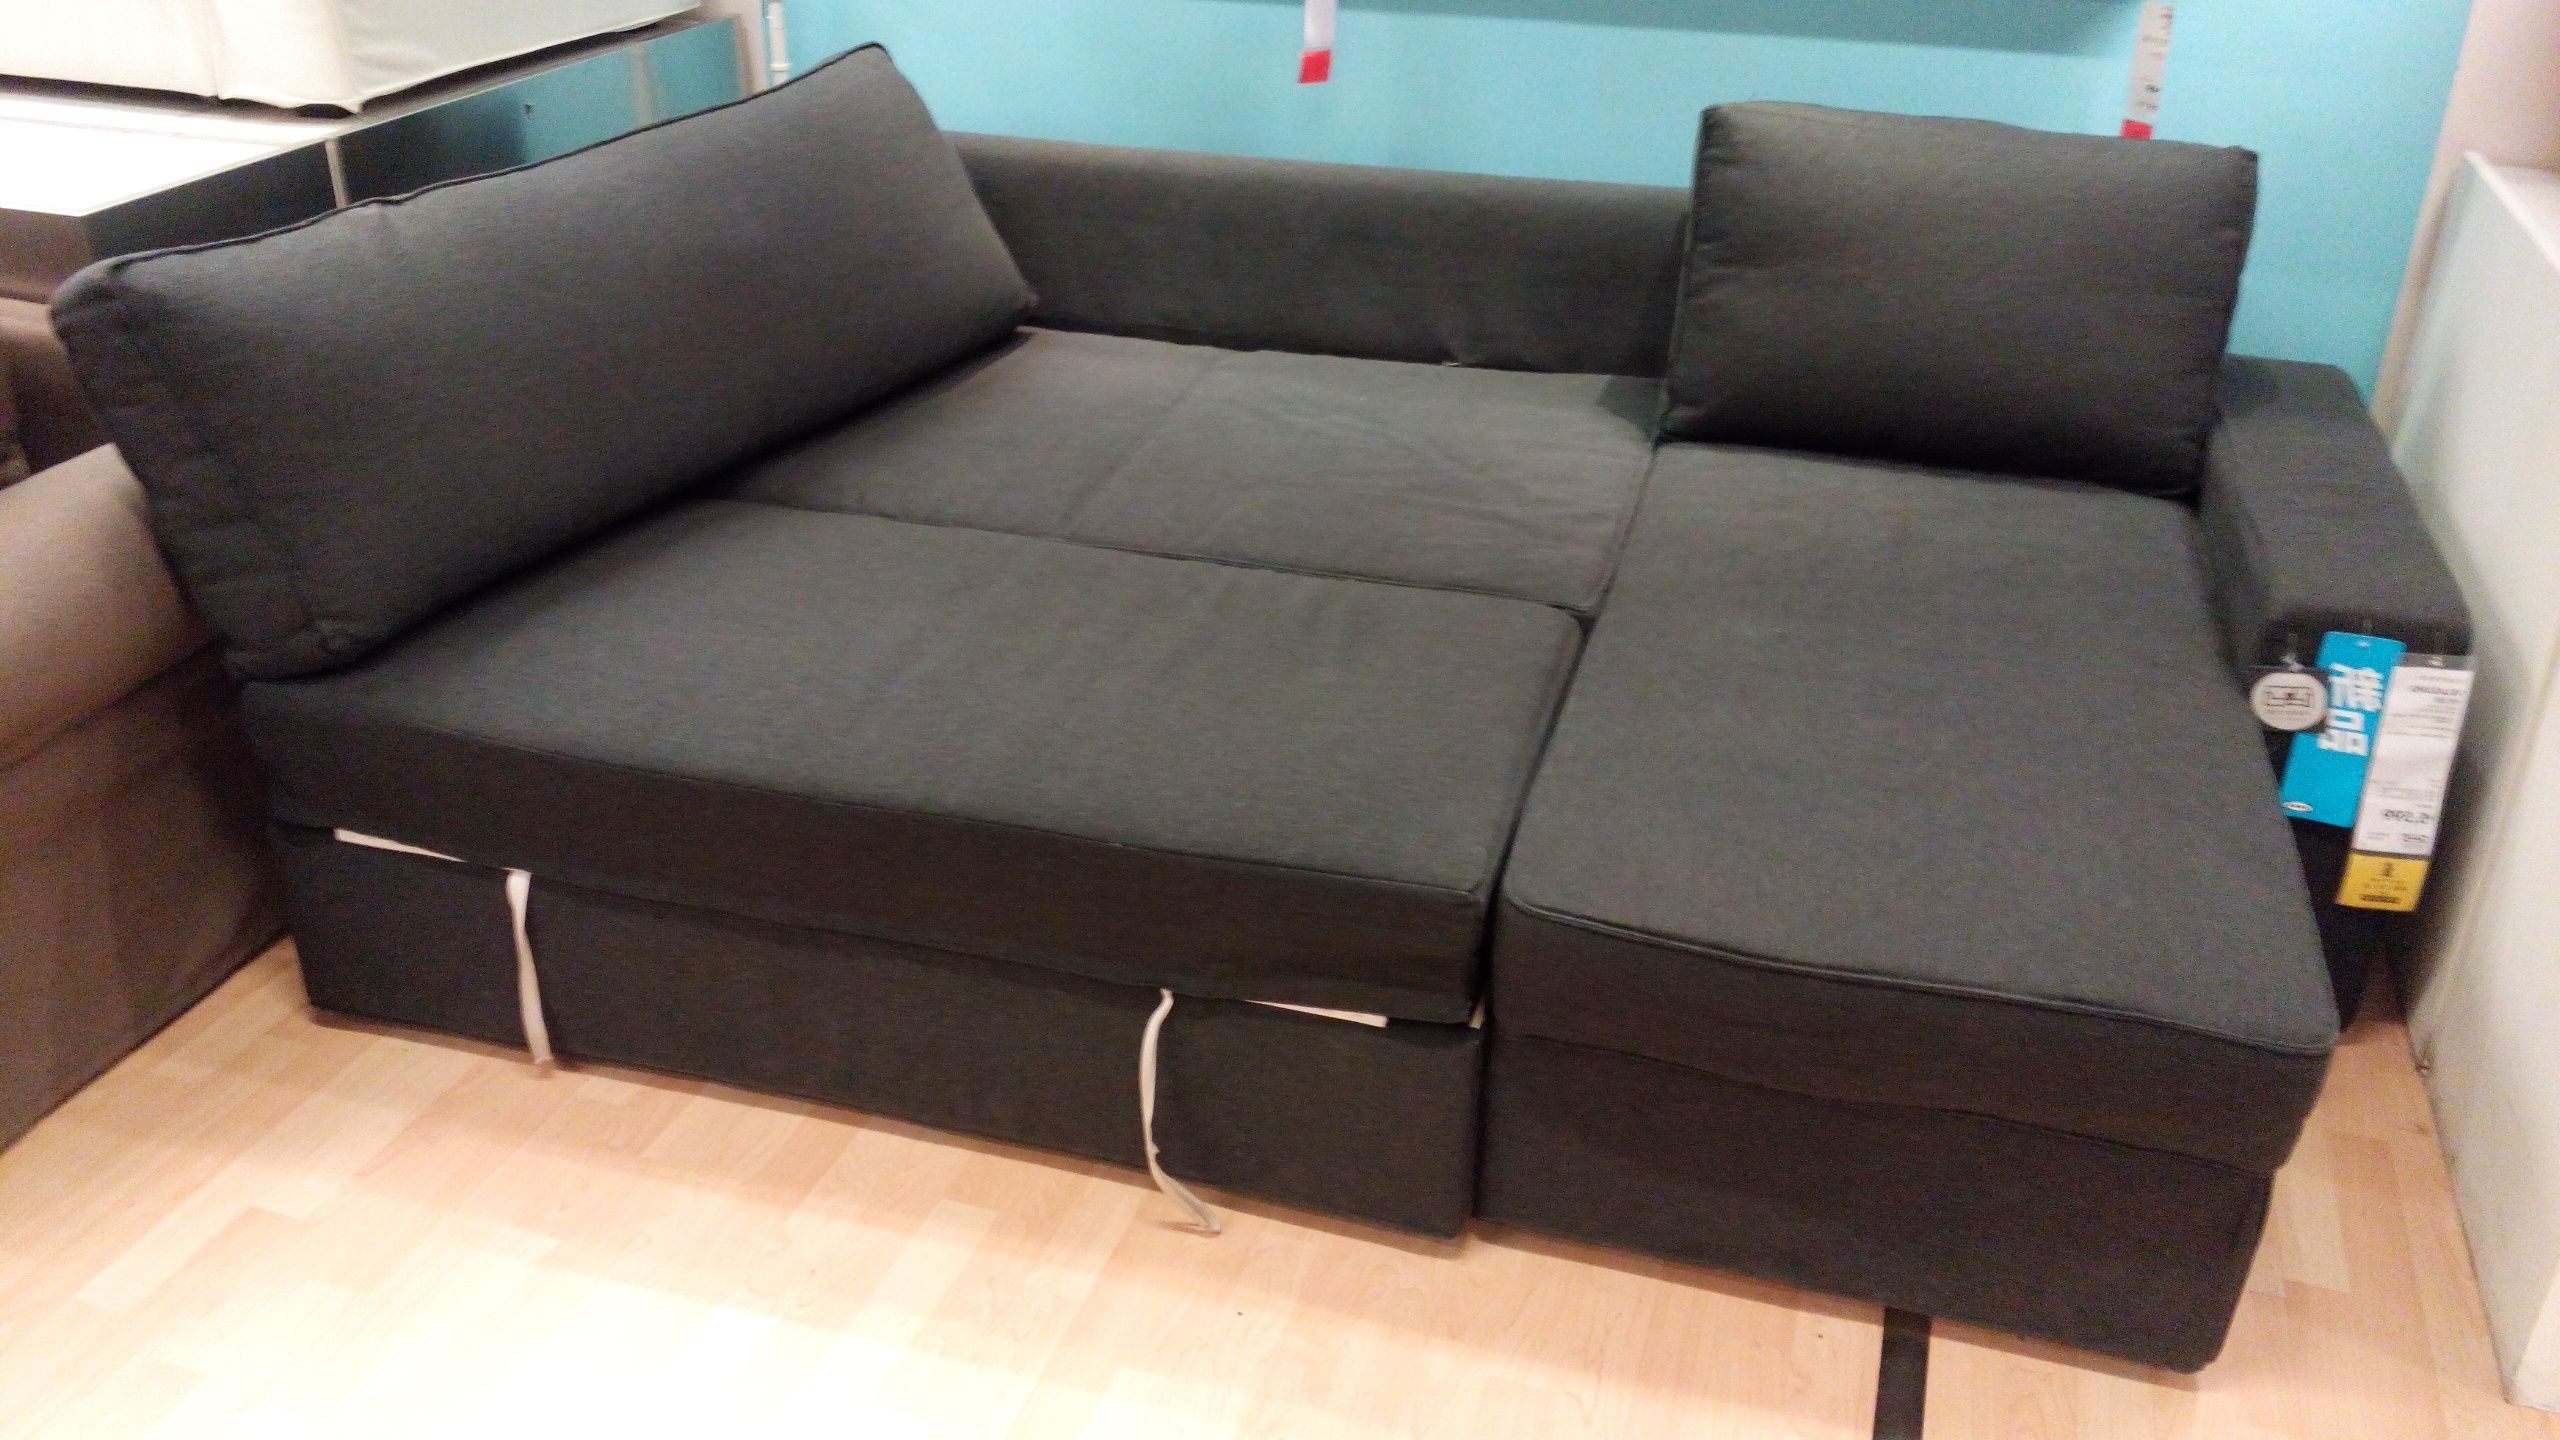 Fashionable Ikea Vilasund And Backabro Review – Return Of The Sofa Bed Clones! Intended For Sofa Chaise Convertible Beds (View 13 of 15)